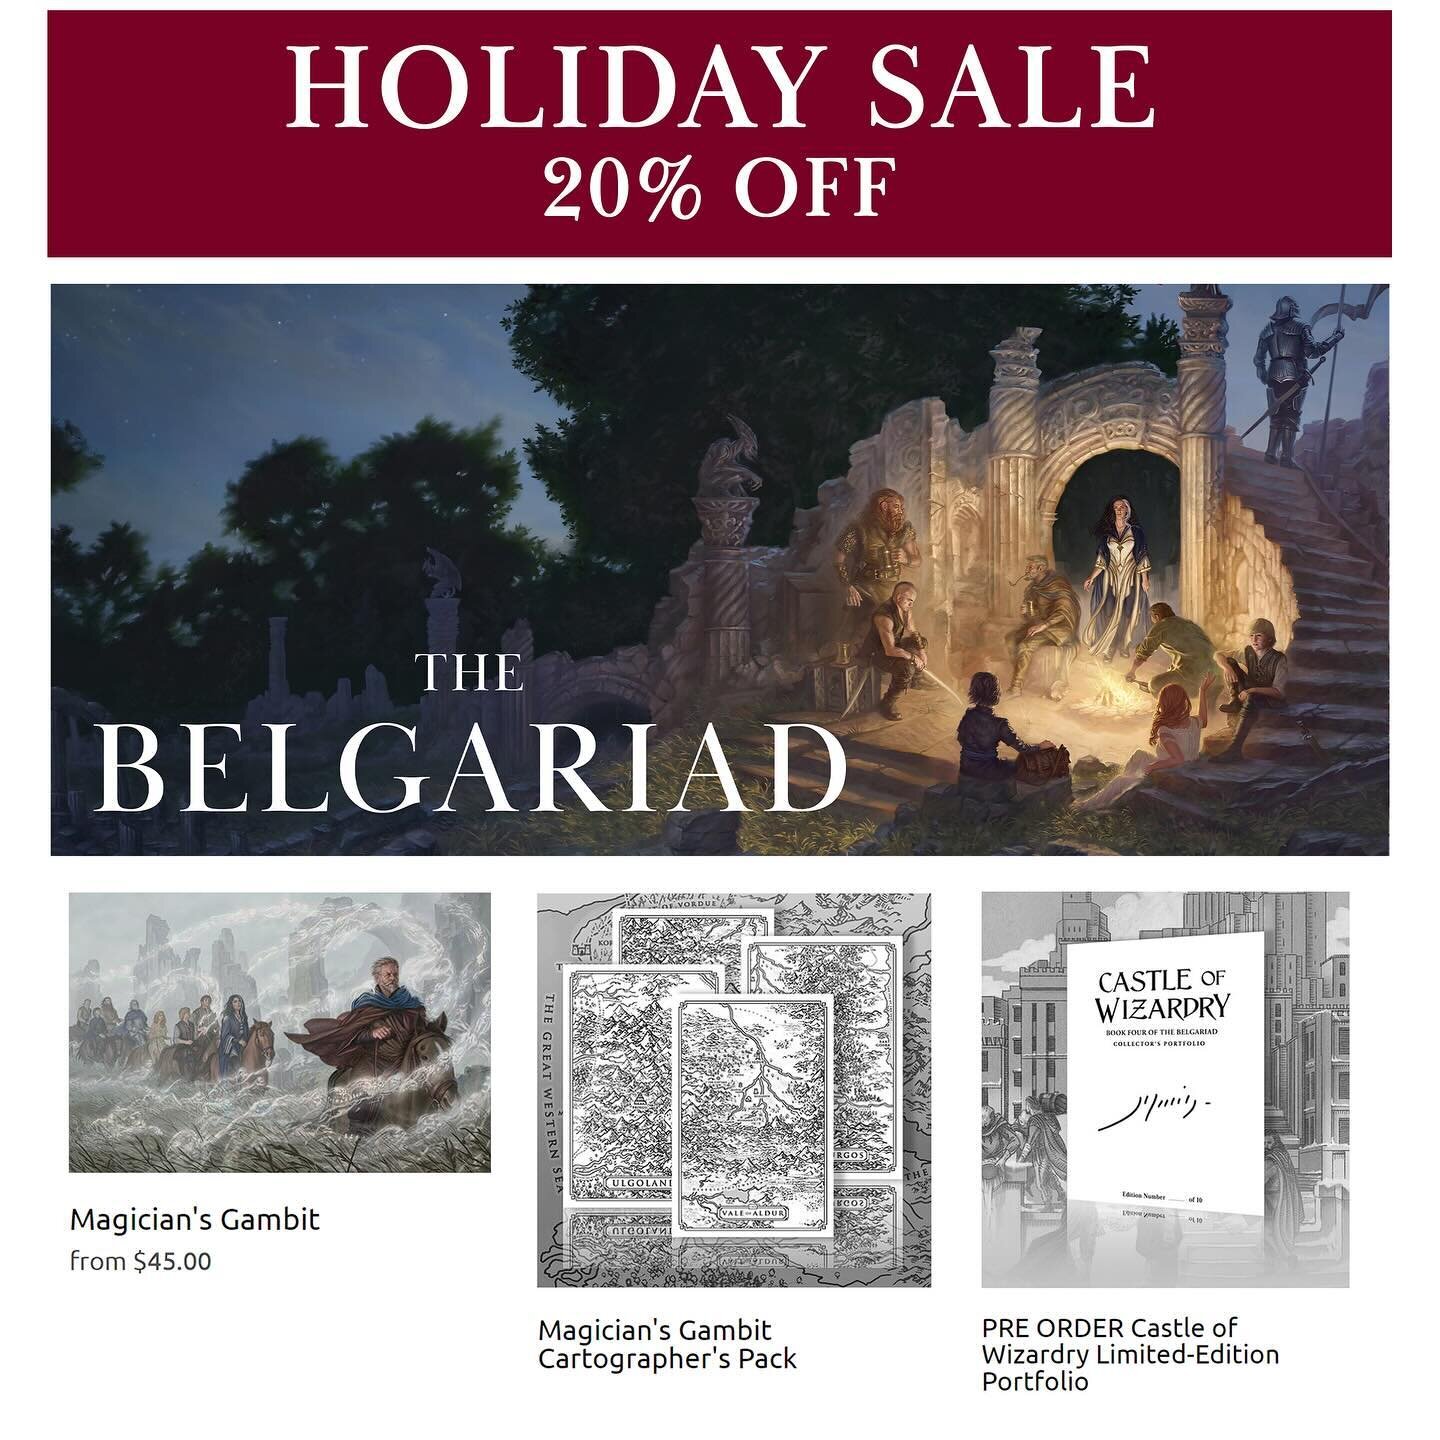 With the new Belgariad work, I forgot to mention I&rsquo;m running my annual print sale! Lots of my numbered portfolios are selling out, which is great! Use code: HOLIDAY for 20% off